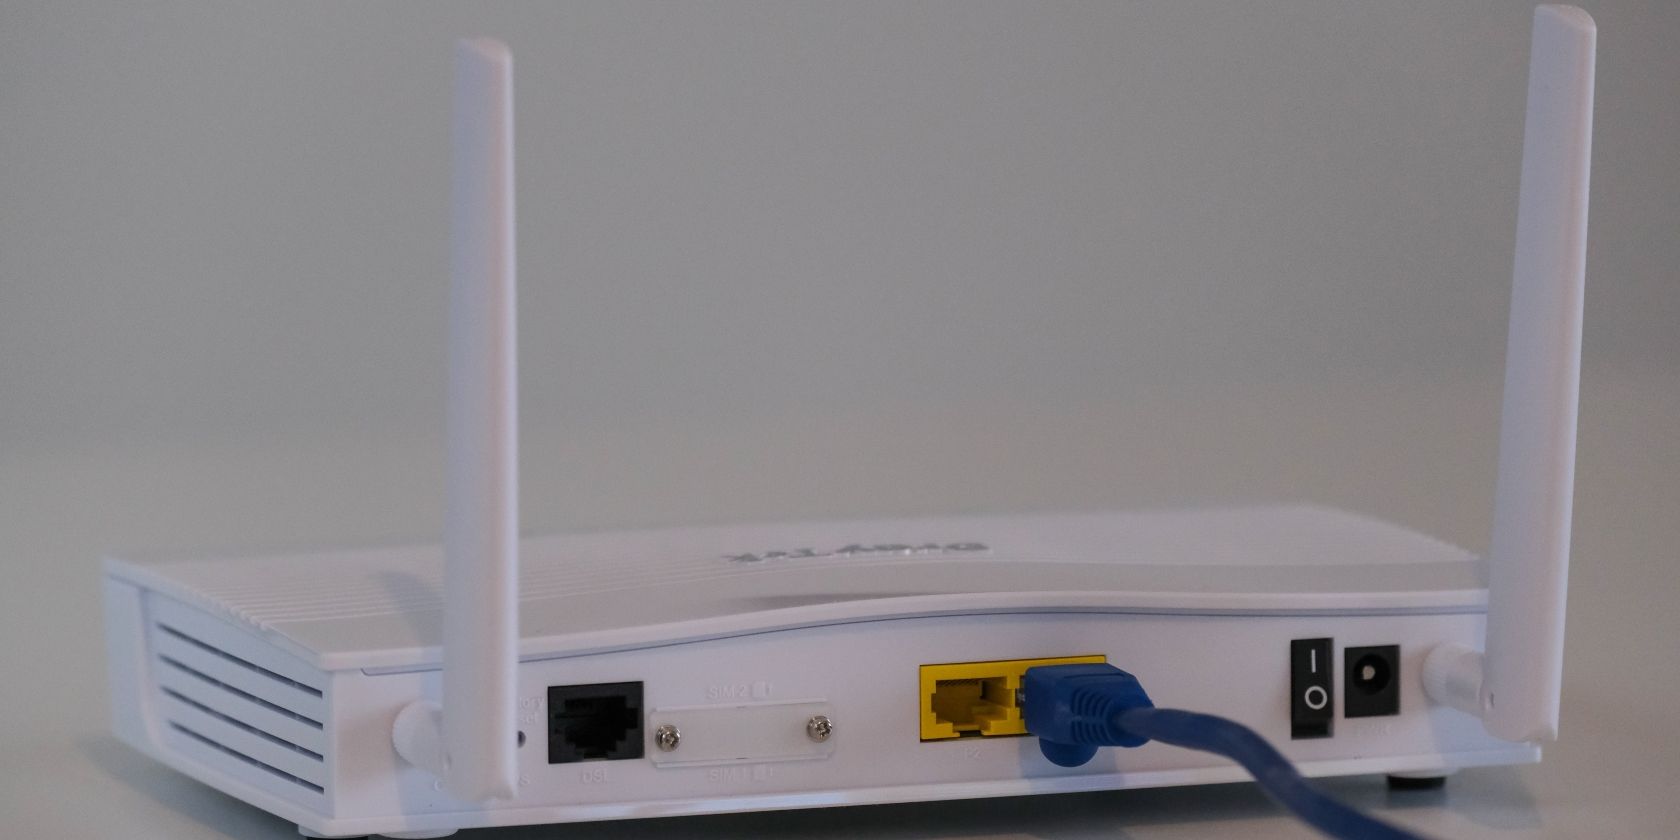 Internet router with cable on white surface